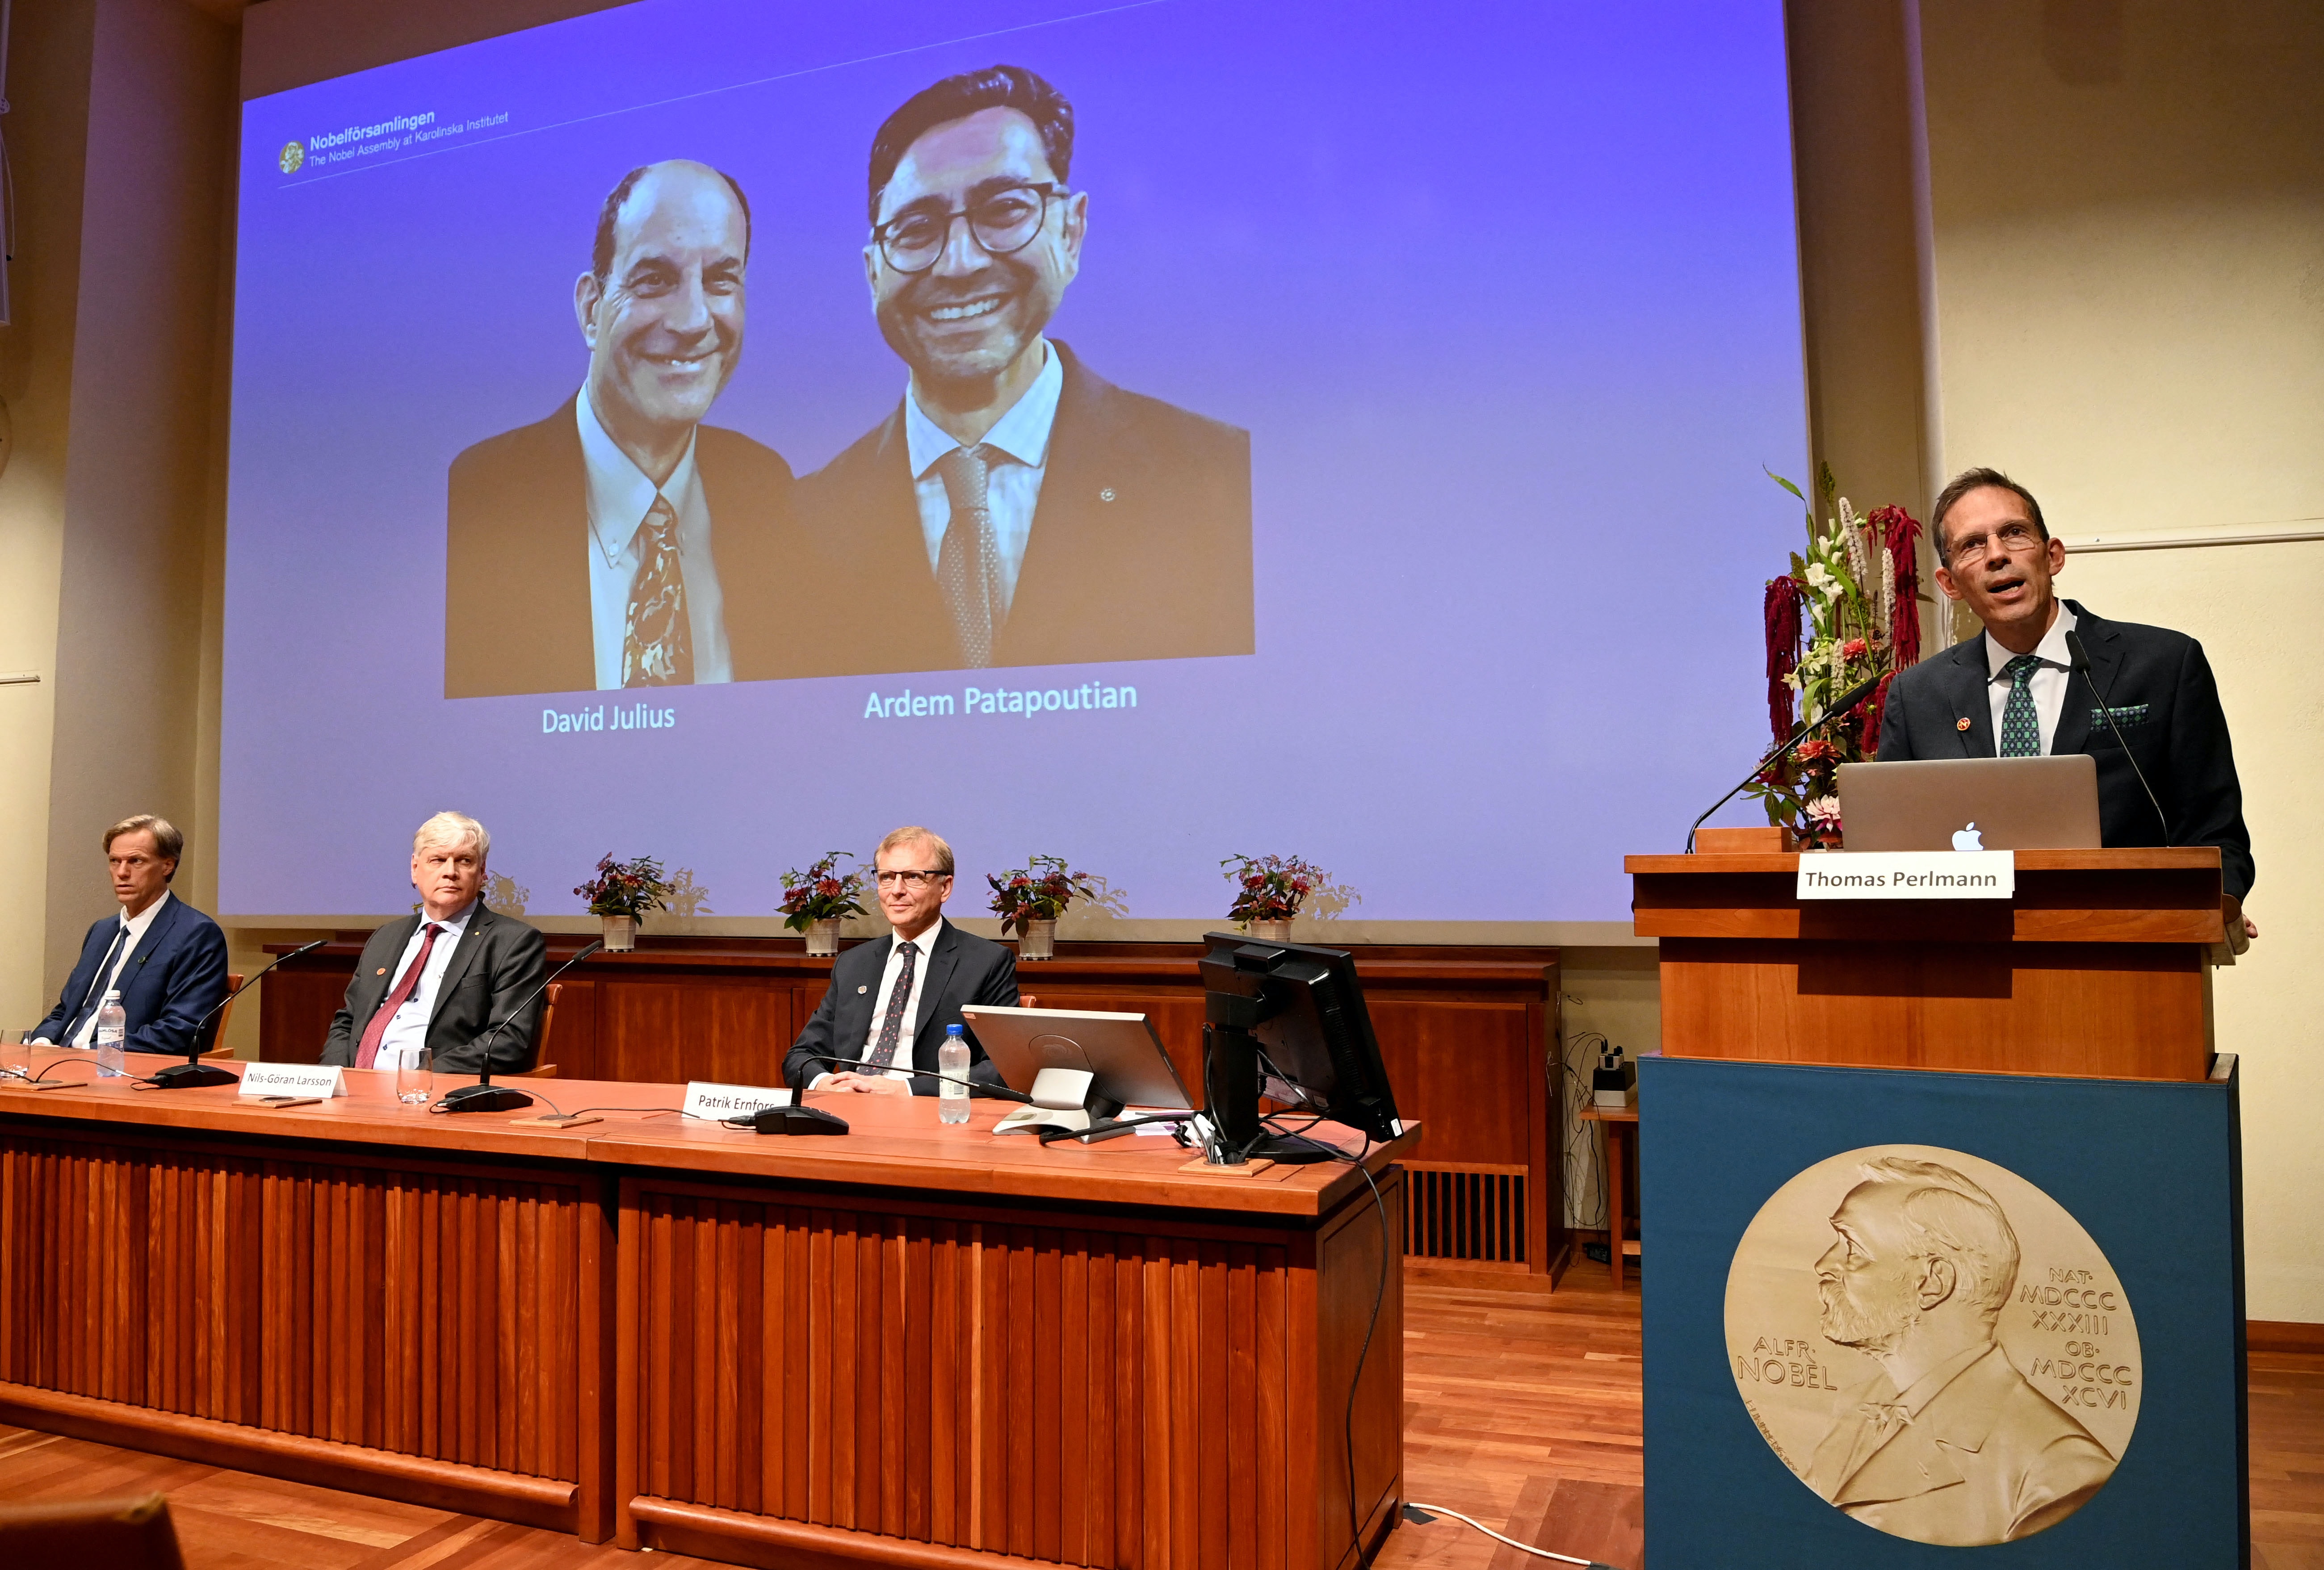 Large screen displaying the winners of the 2021 Nobel Prize in Physiology or Medicine